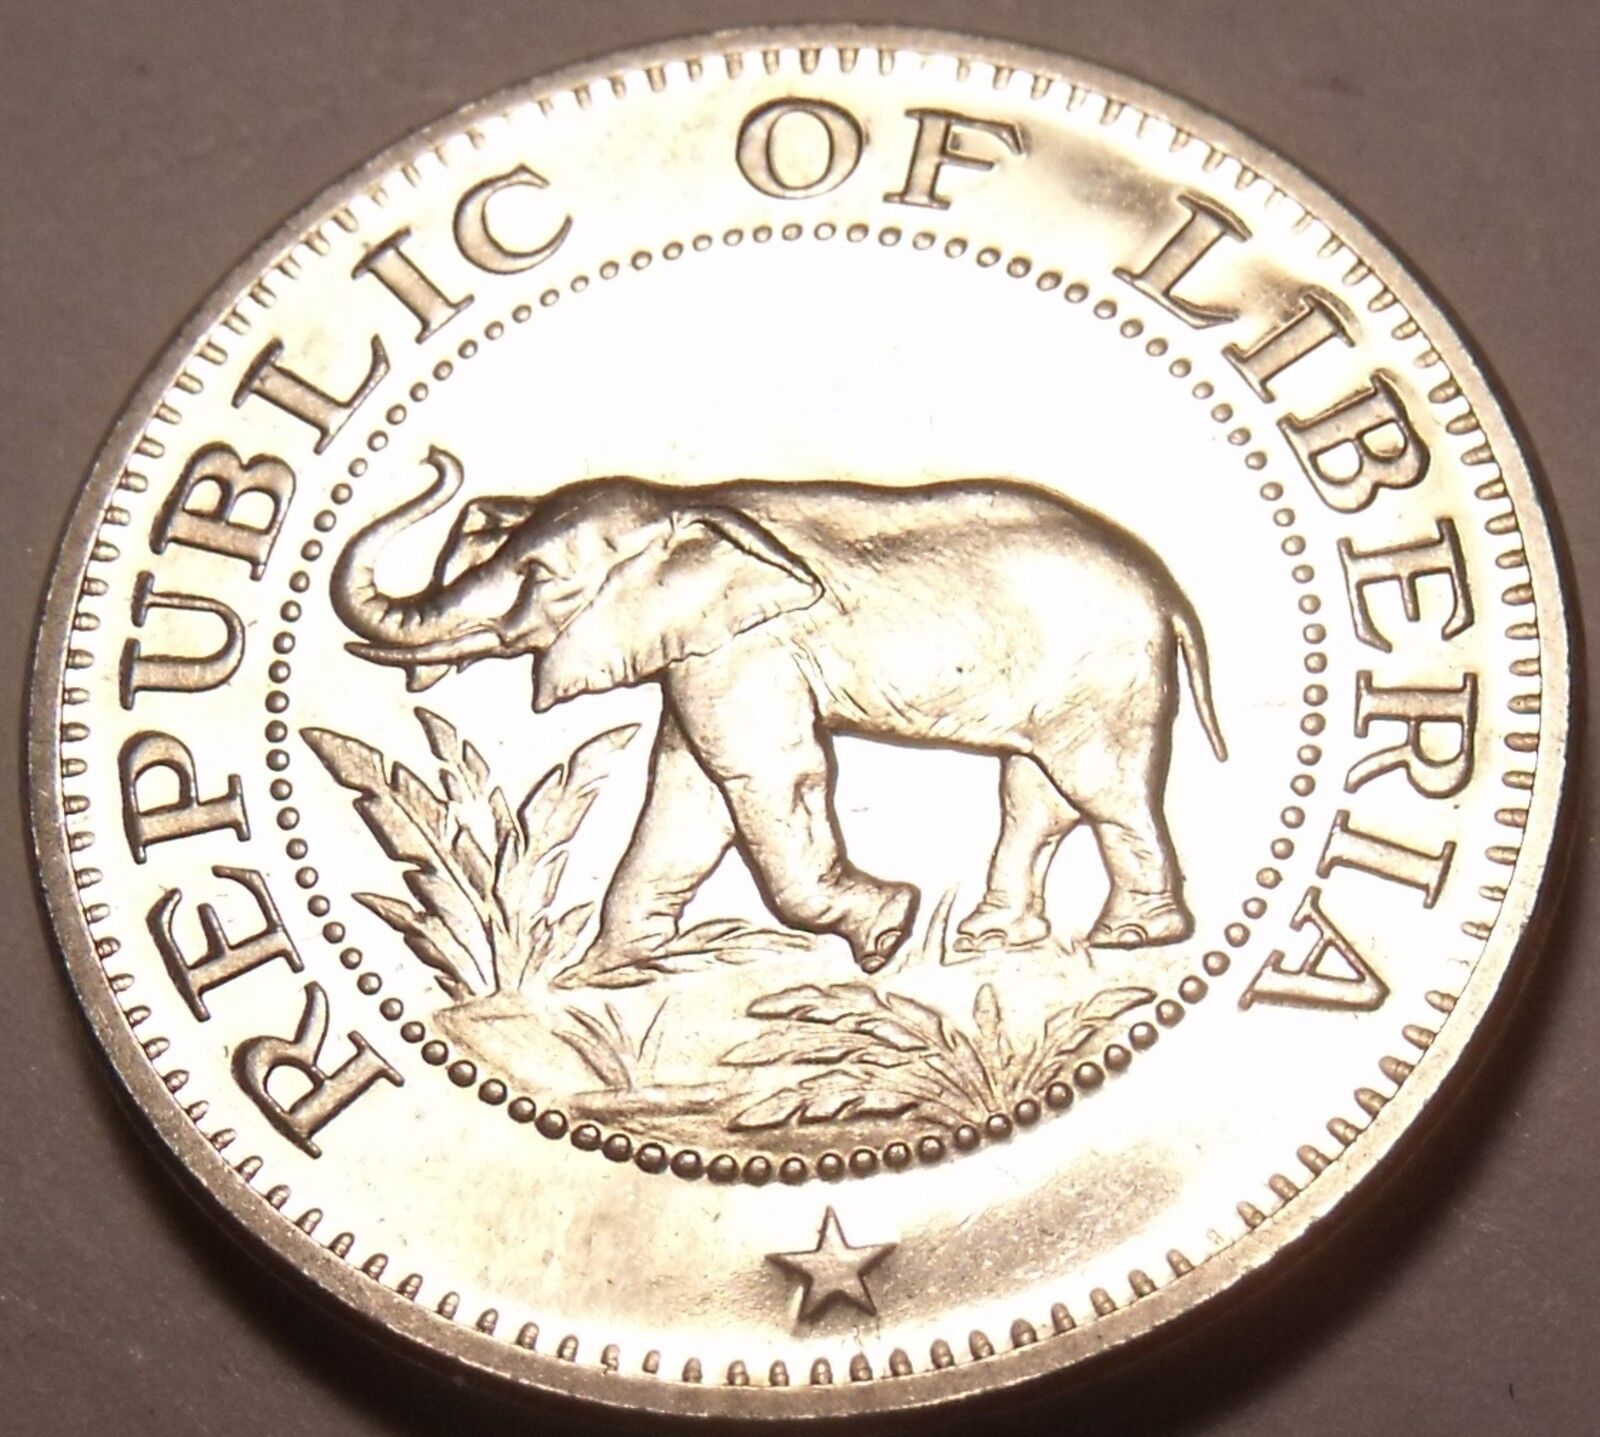 Rare Proof Liberia 1968 5 Cents~Only 14,396 Minted~Elephant Coin~Free Ship